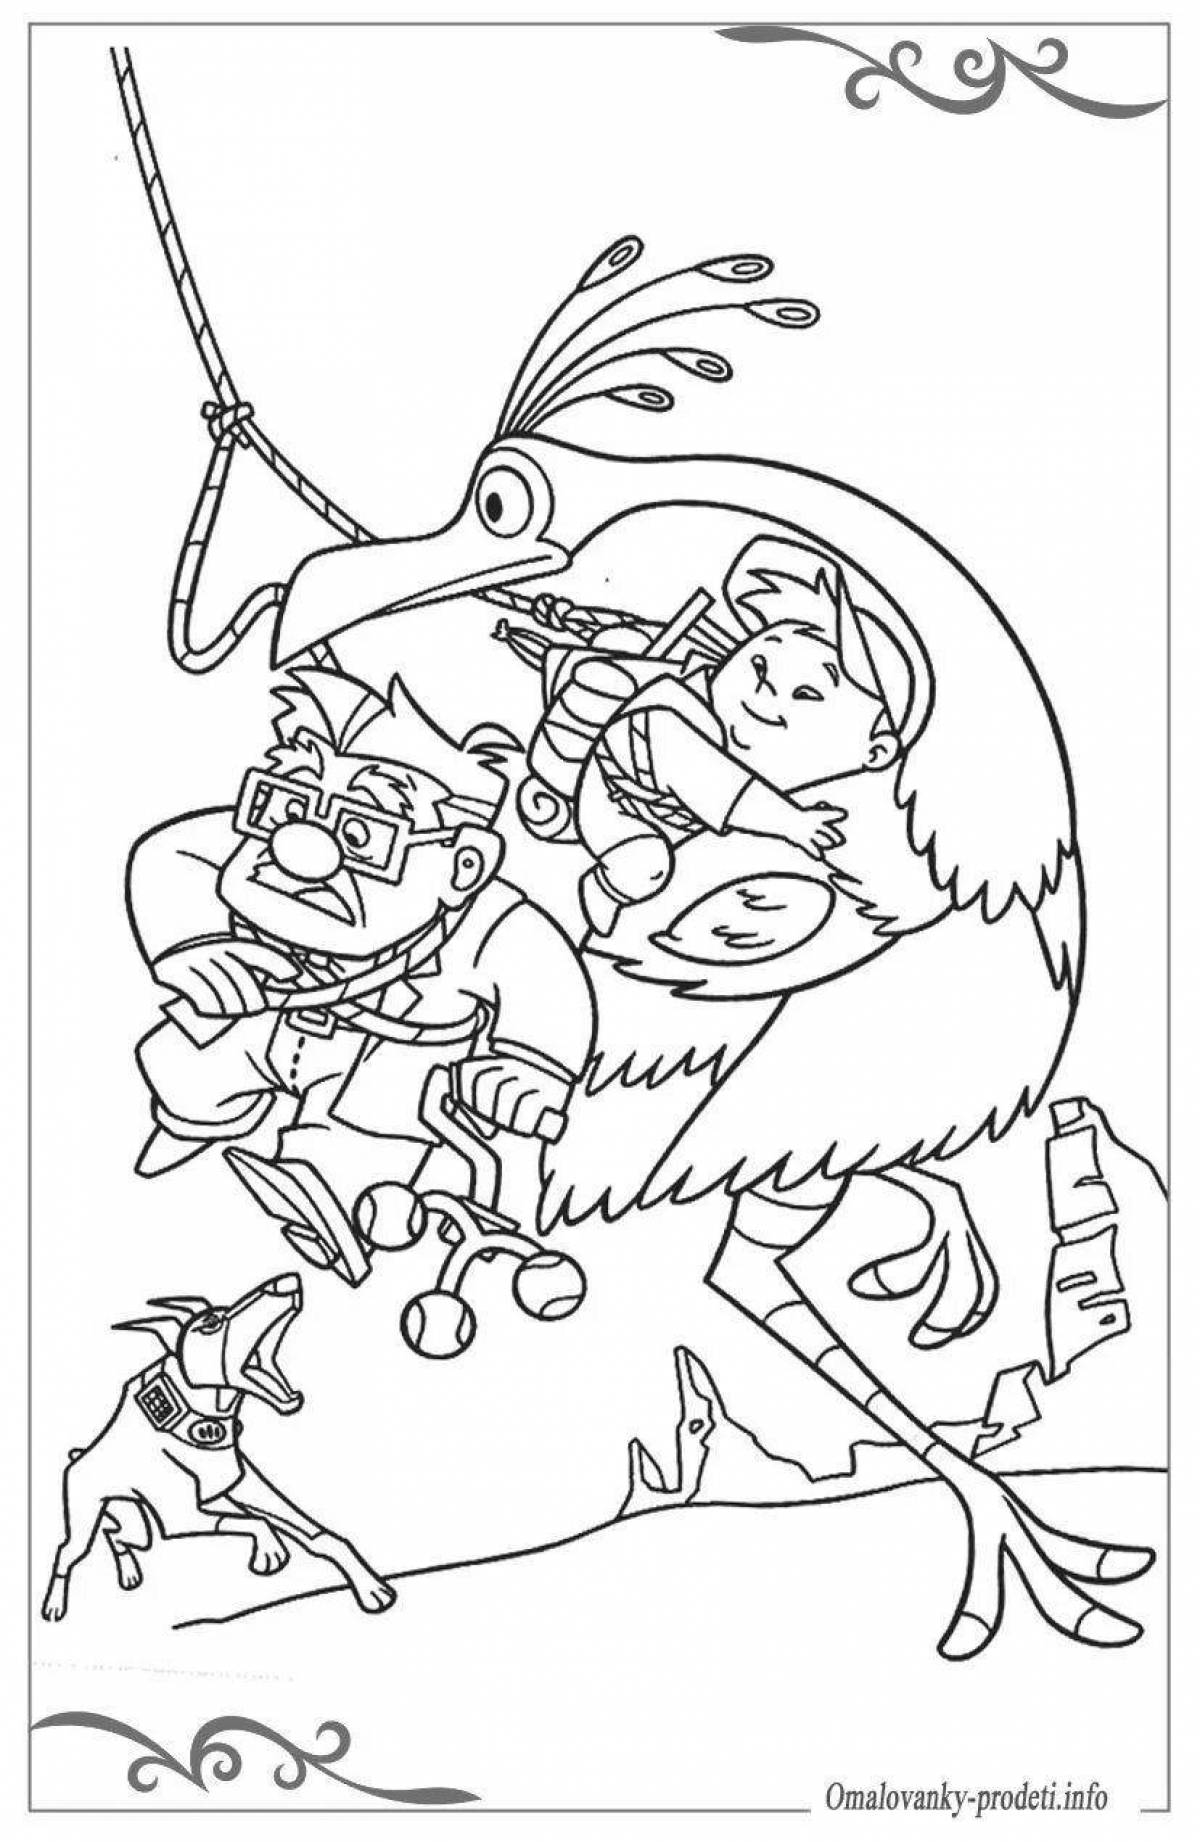 Brilliant coloring page up